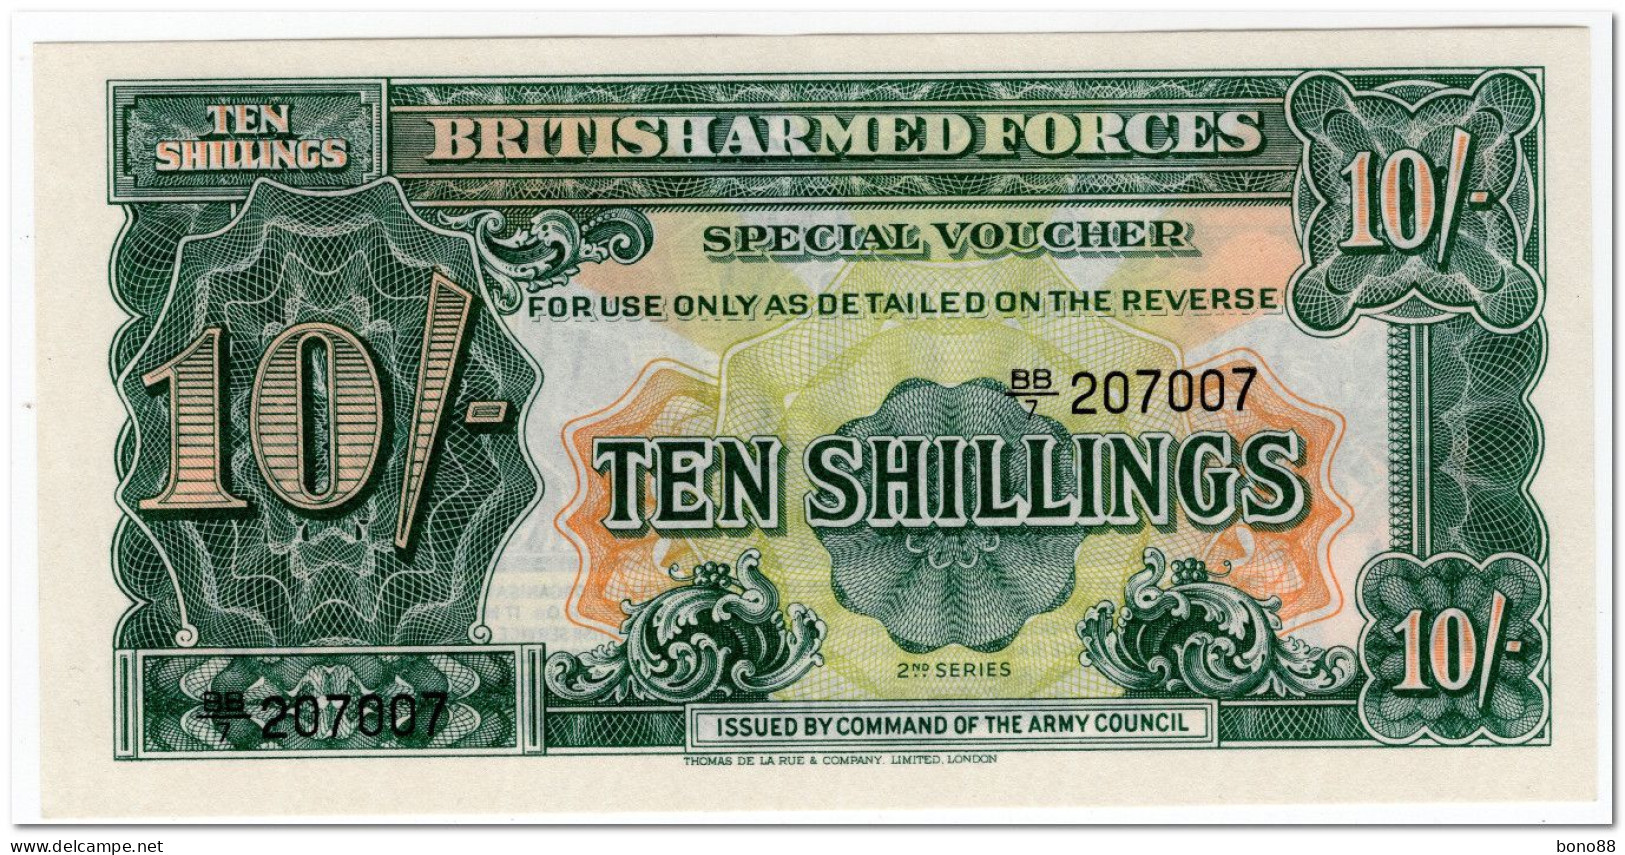 BRITISH ARMED FORCES,10 SHILLINGS,1961,P.M21b,UNC - British Armed Forces & Special Vouchers